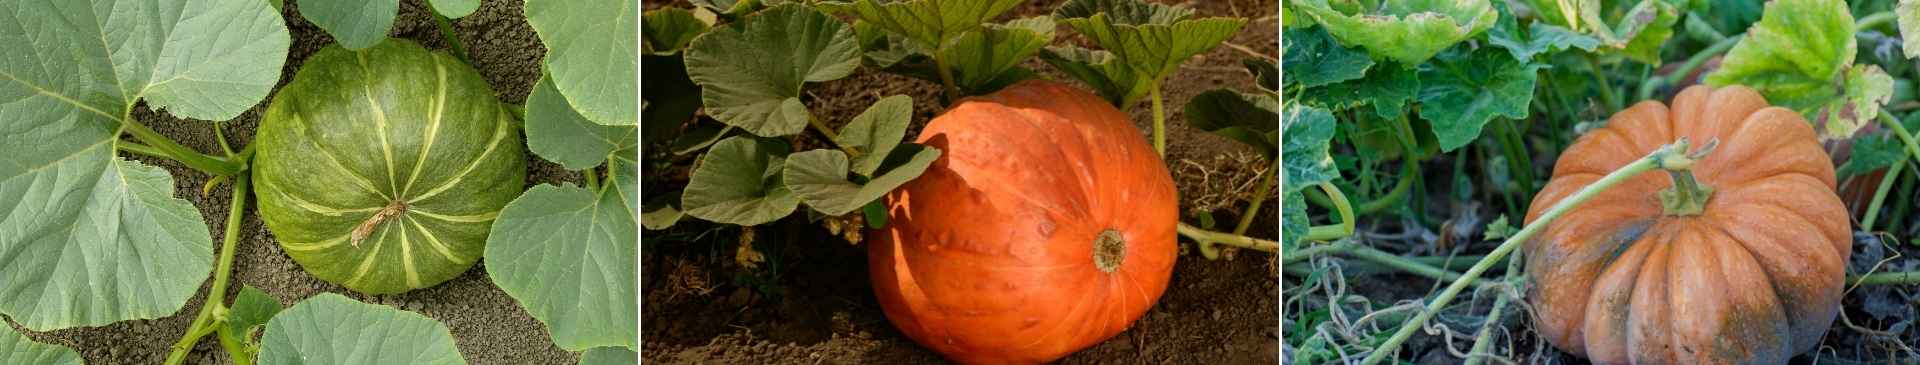 How to Grow Giant Pumpkins: A Short Guide for Enormous Results